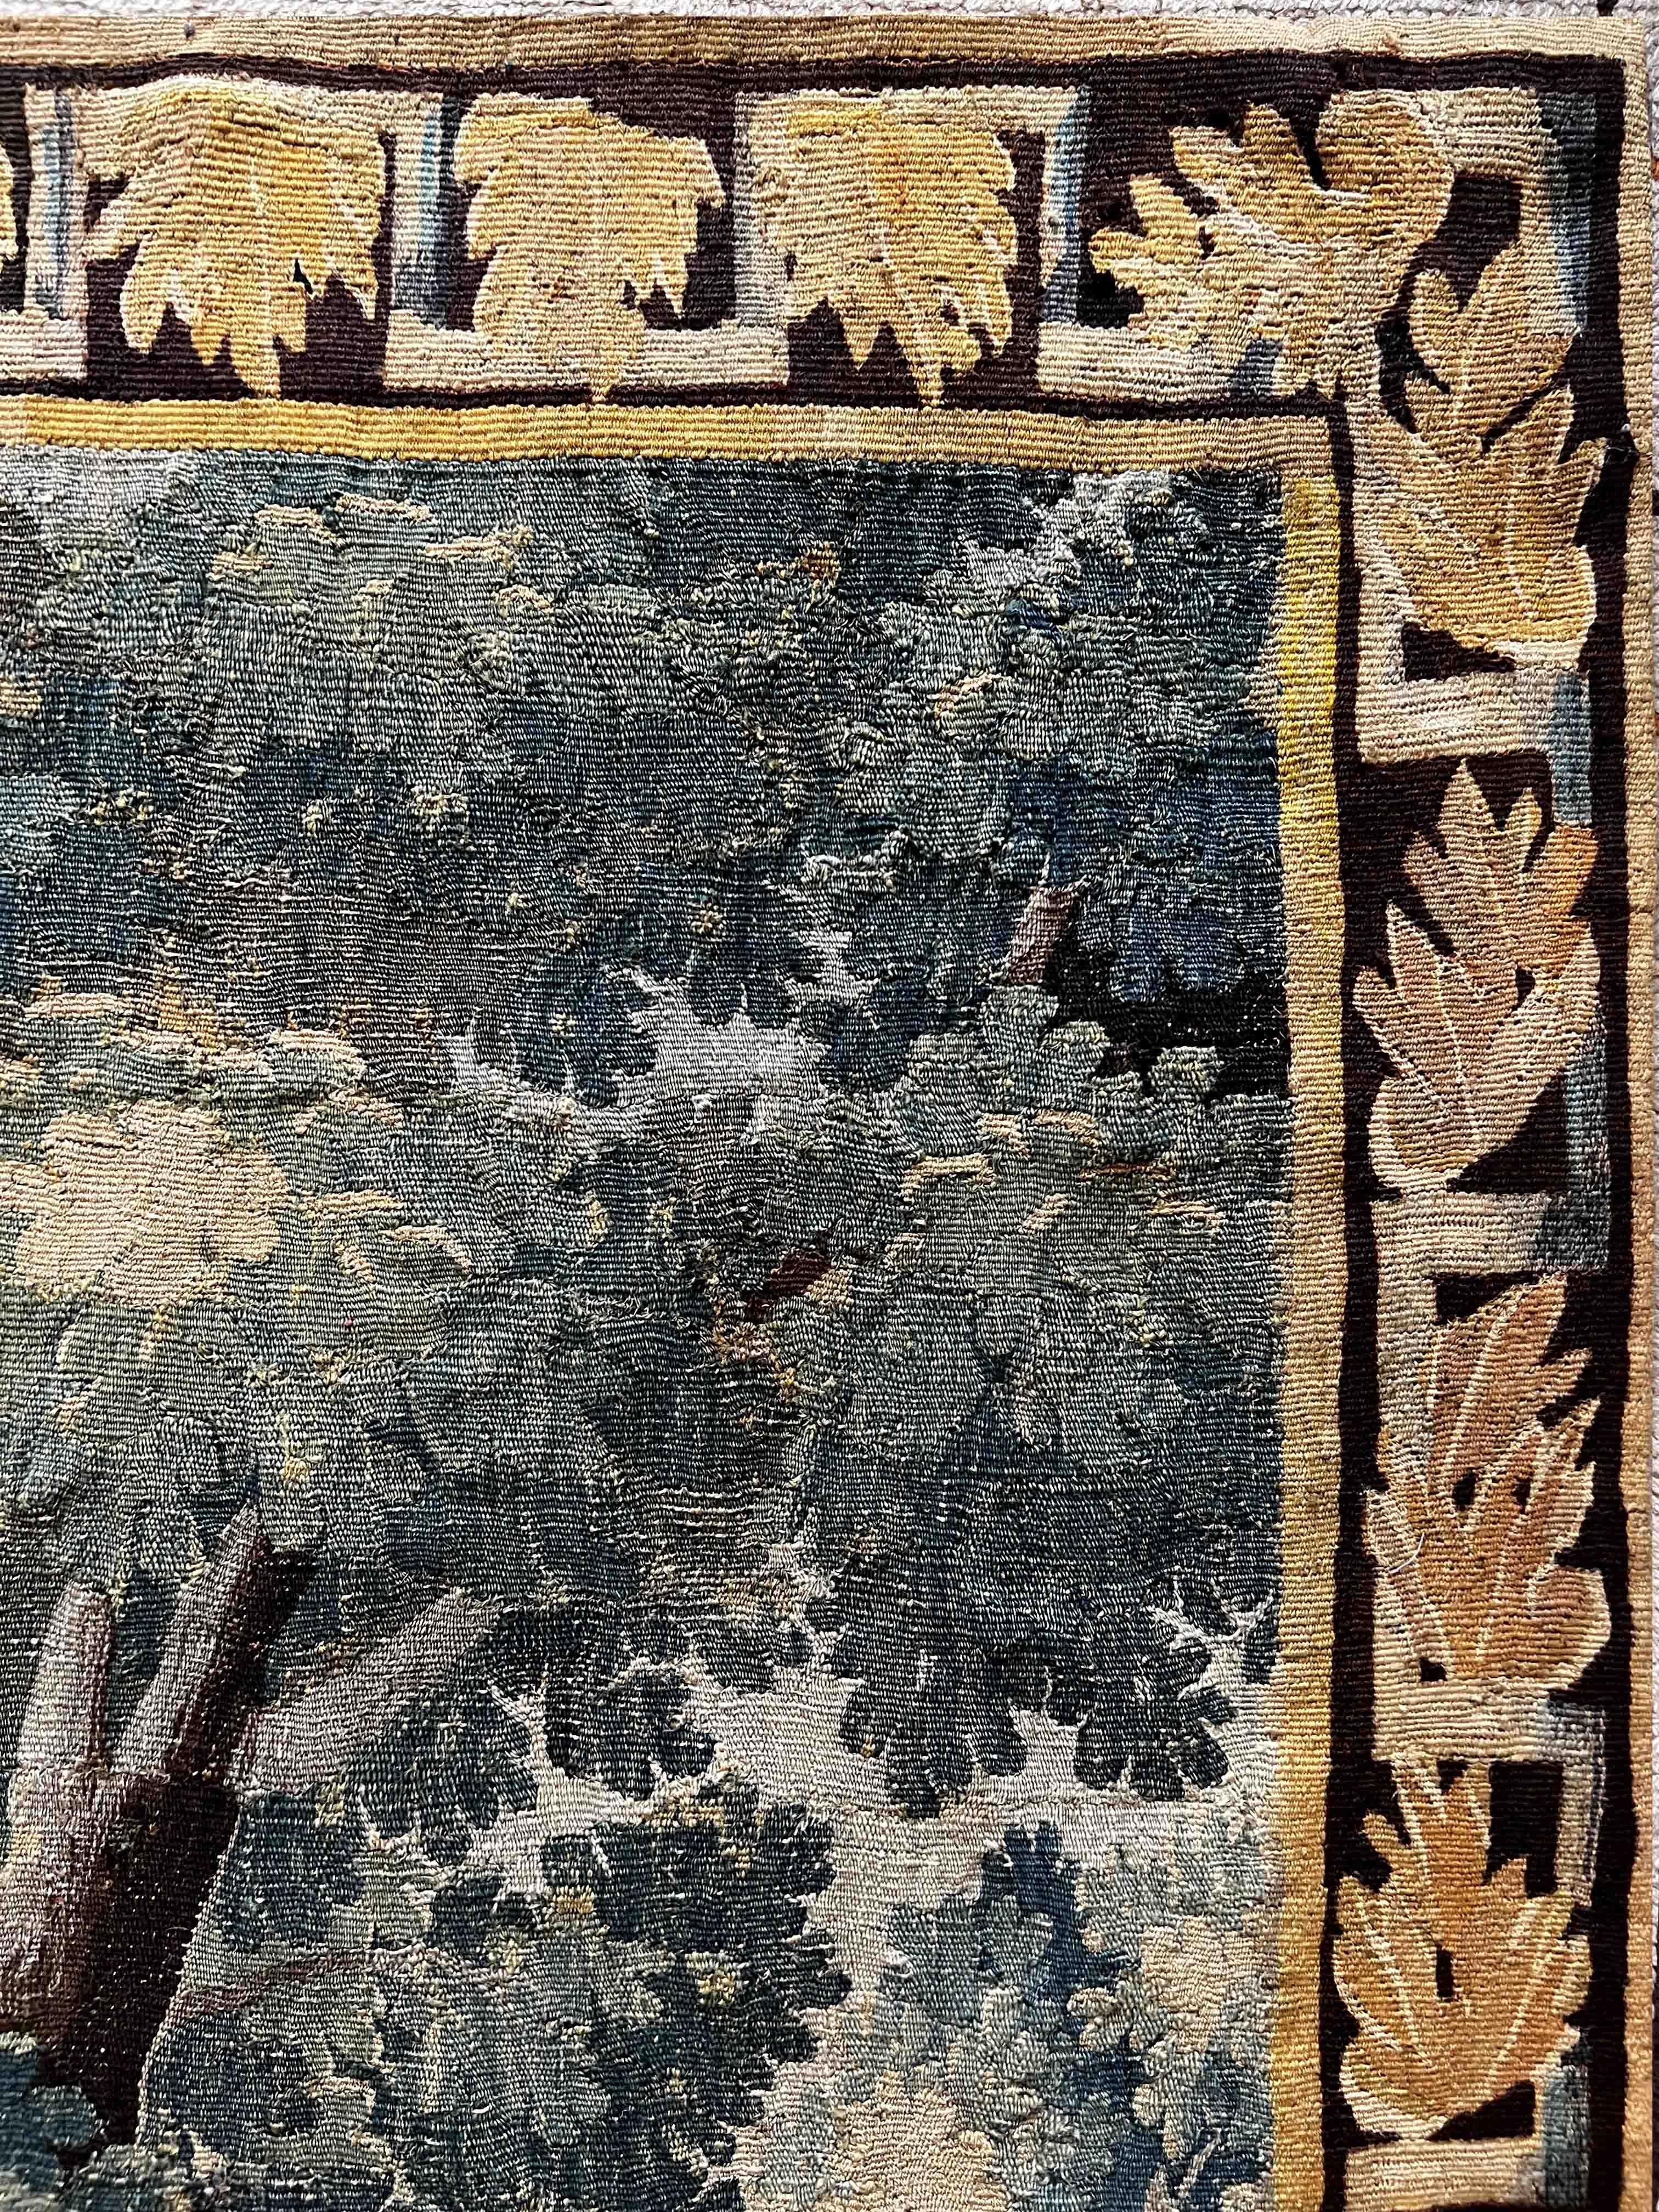 Hand-Woven 18th century tapestry Aubusson France - n° 1178